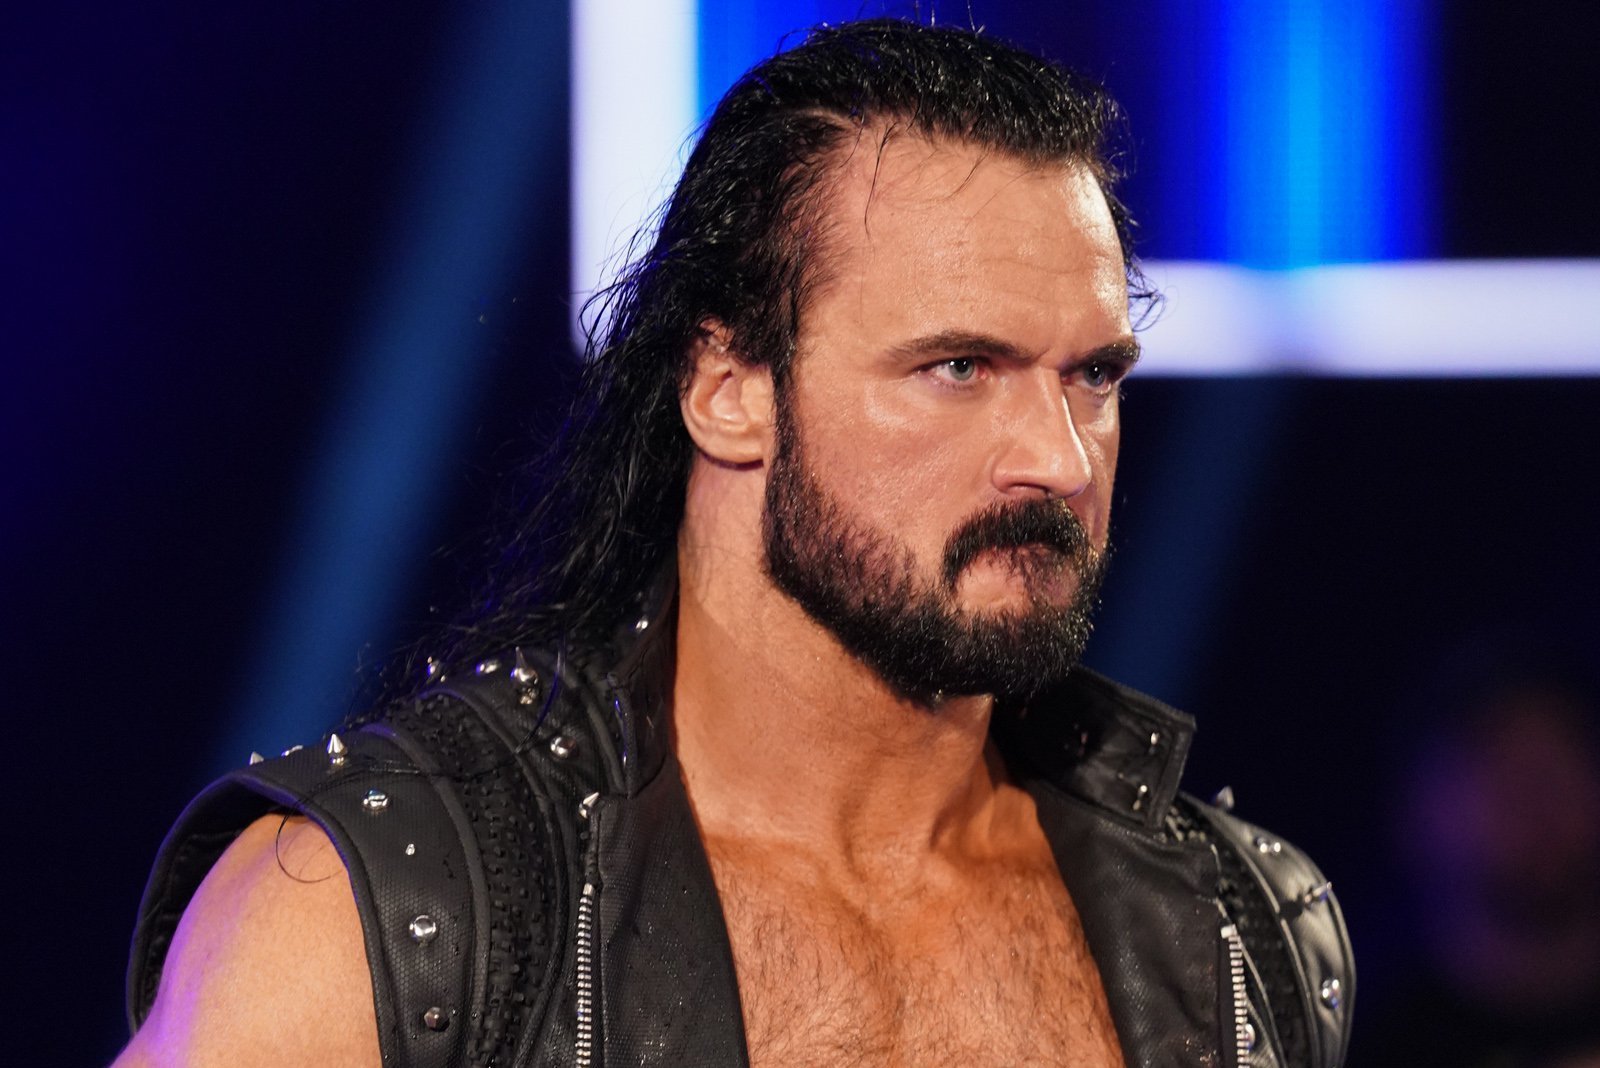 Backstage WWE Rumors: Latest on Drew McIntyre, Money in the Bank and More